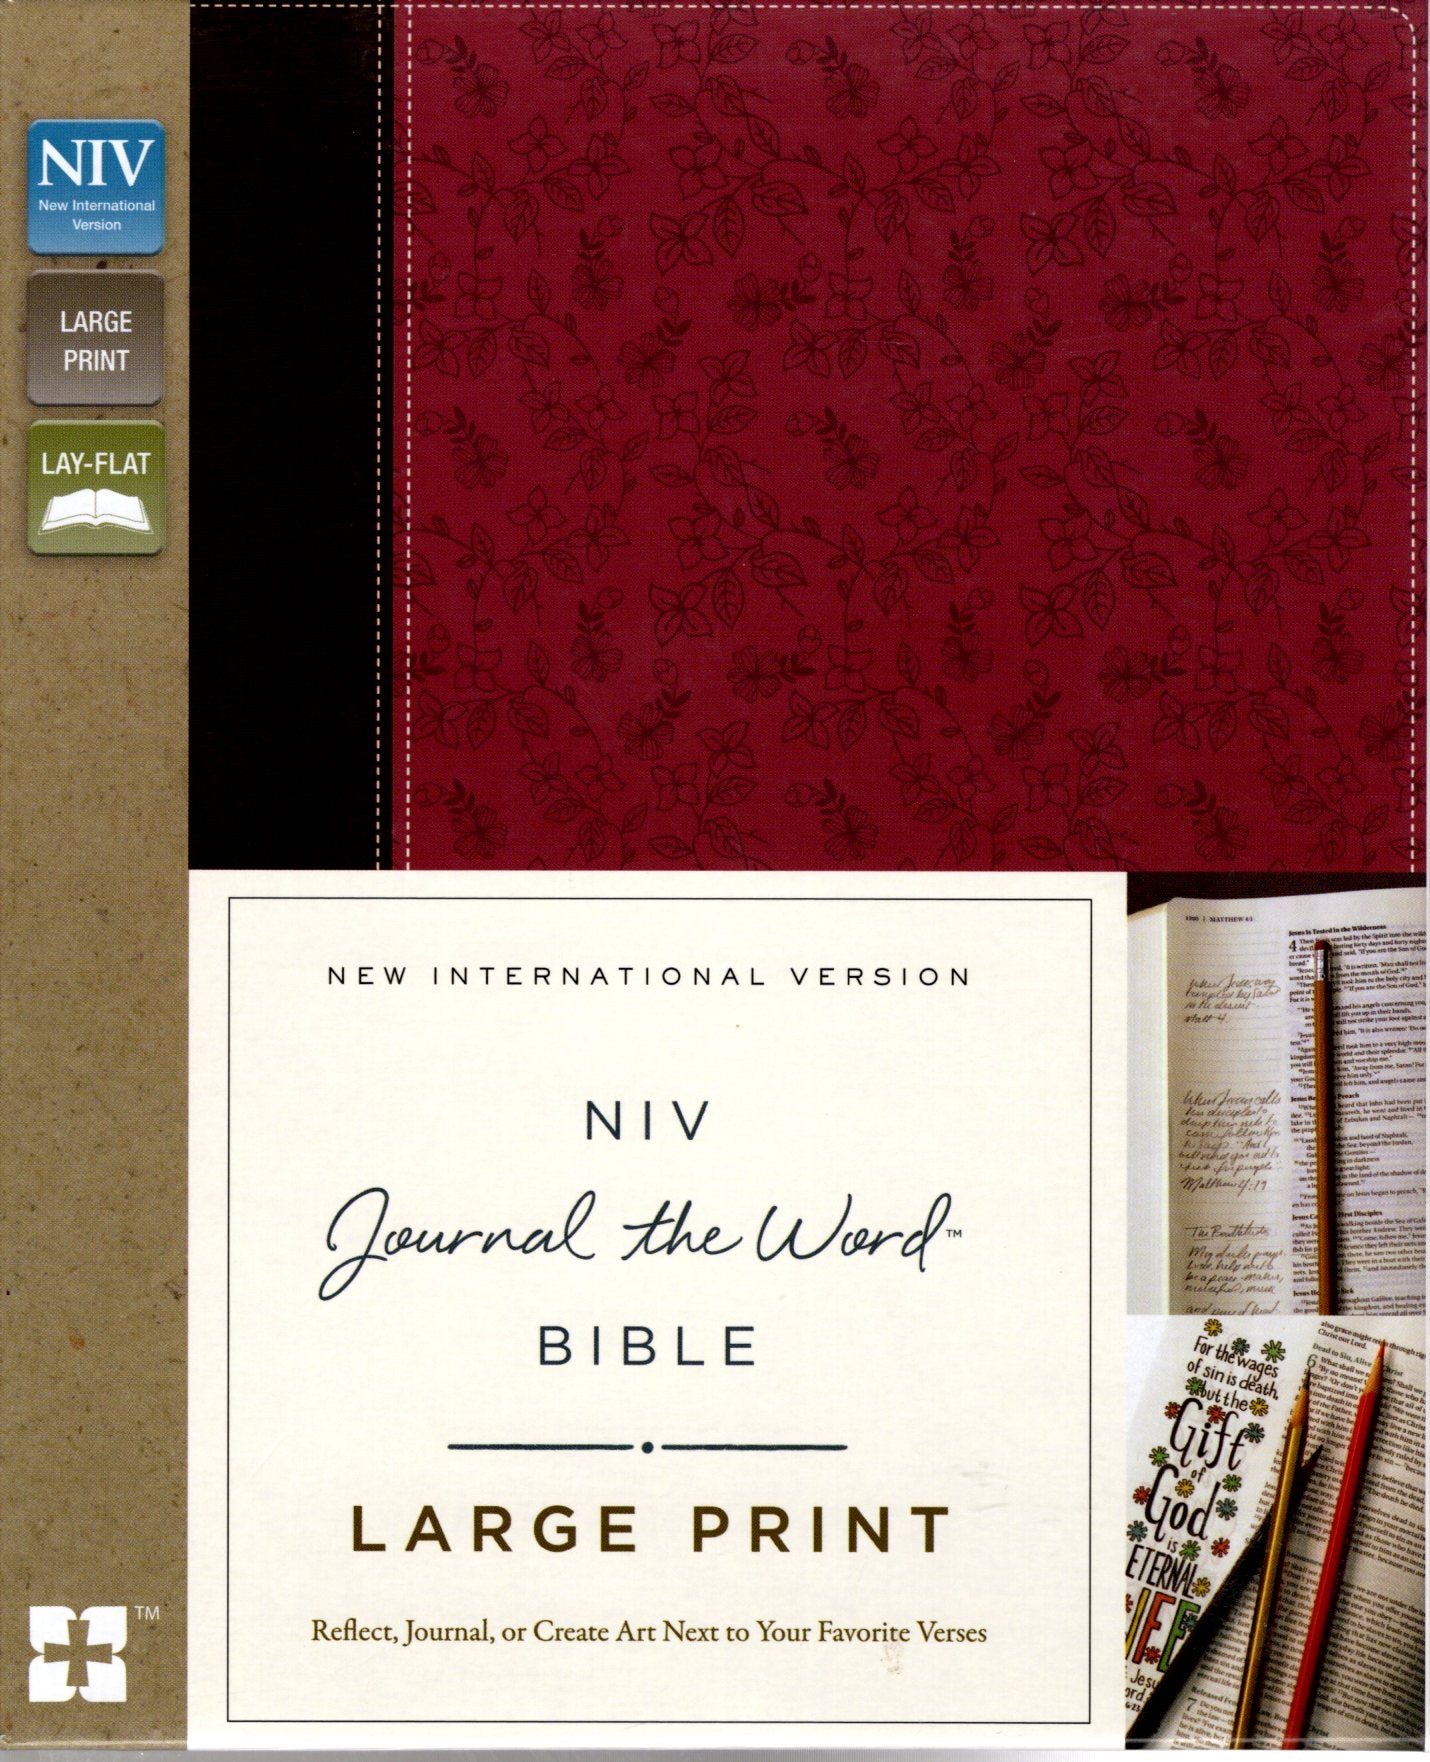 Zondervan NIV® Journal the Word™ Bible Large Print - LeatherSoft™ (Orchid/Chocolate)